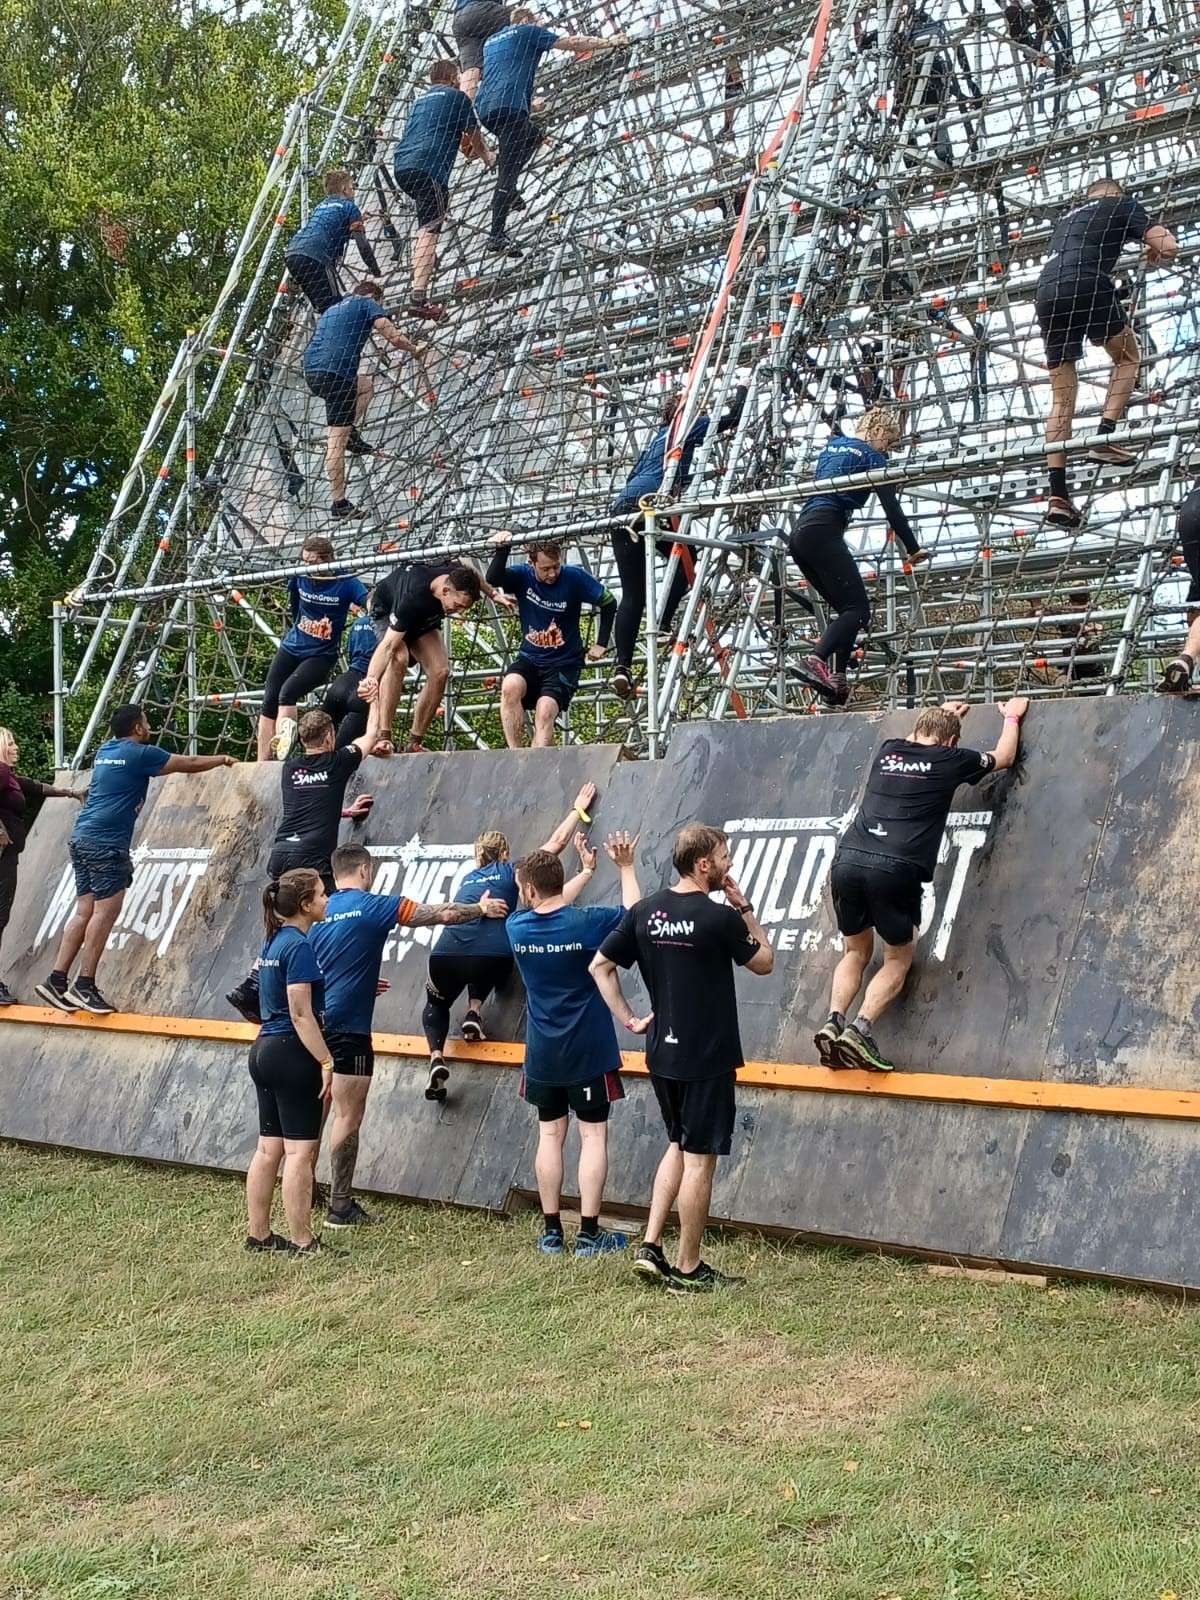 A large climbing obstacle, with lots of people scaling it and helping others to get up and onto it.